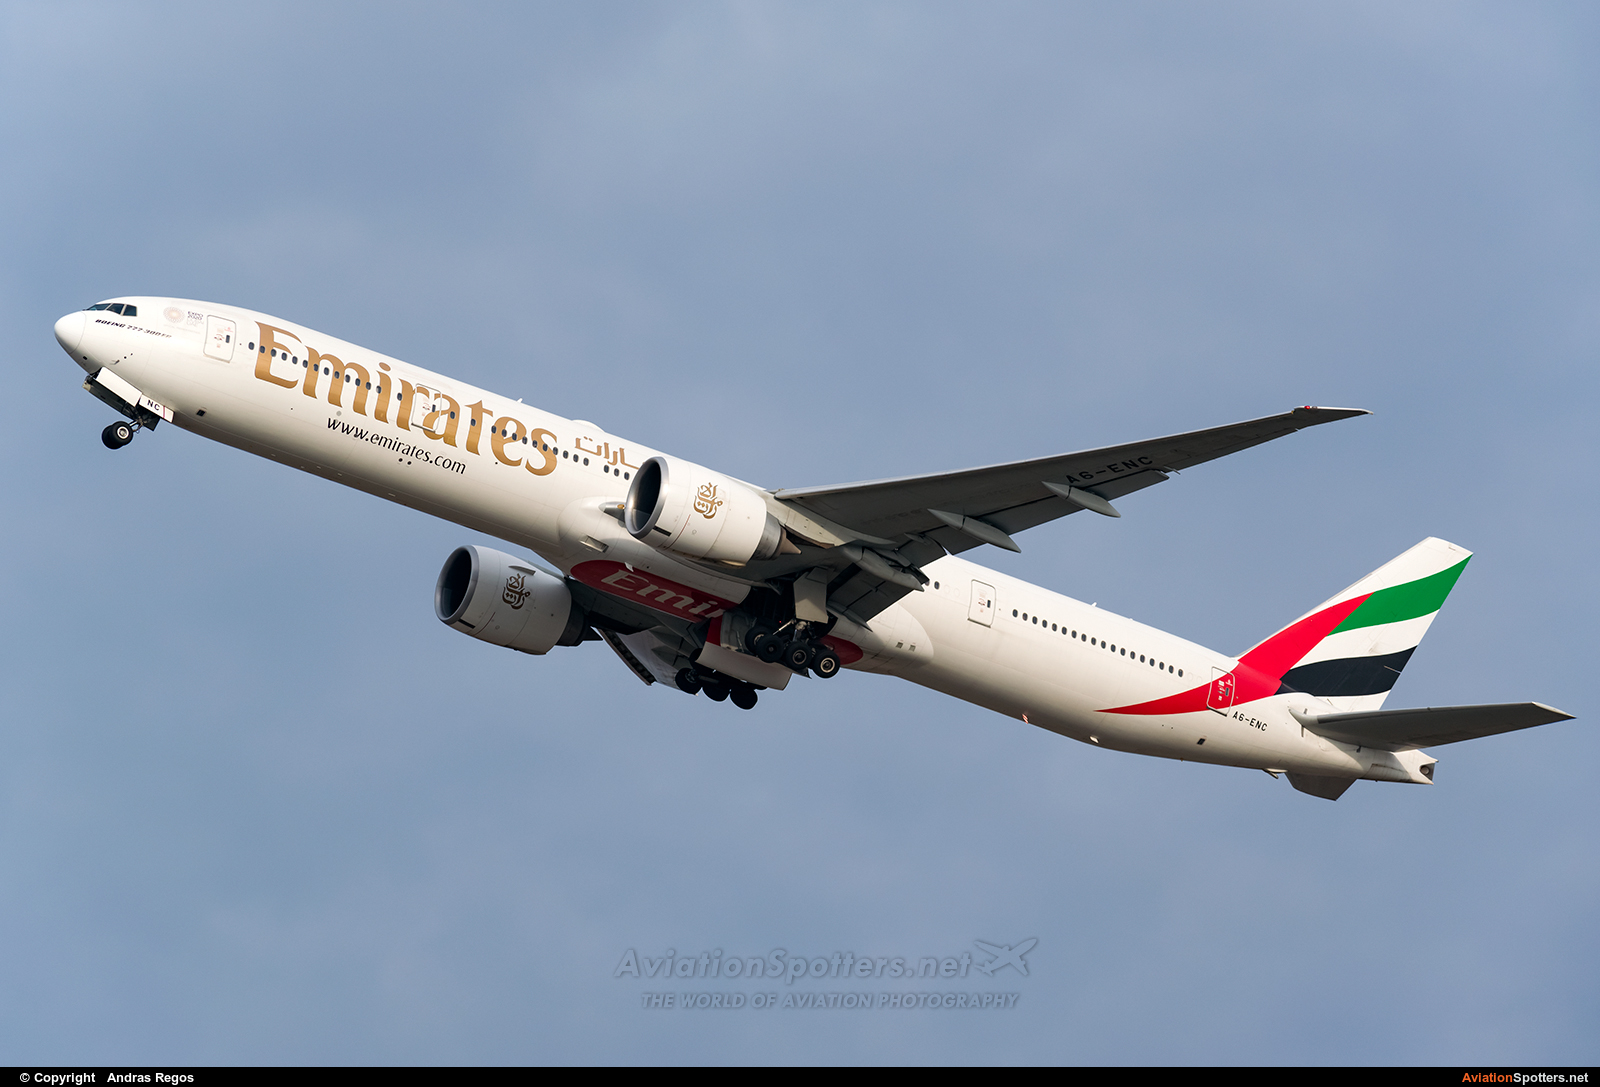 Emirates Airlines  -  777-300ER  (A6-ENC) By Andras Regos (regos)